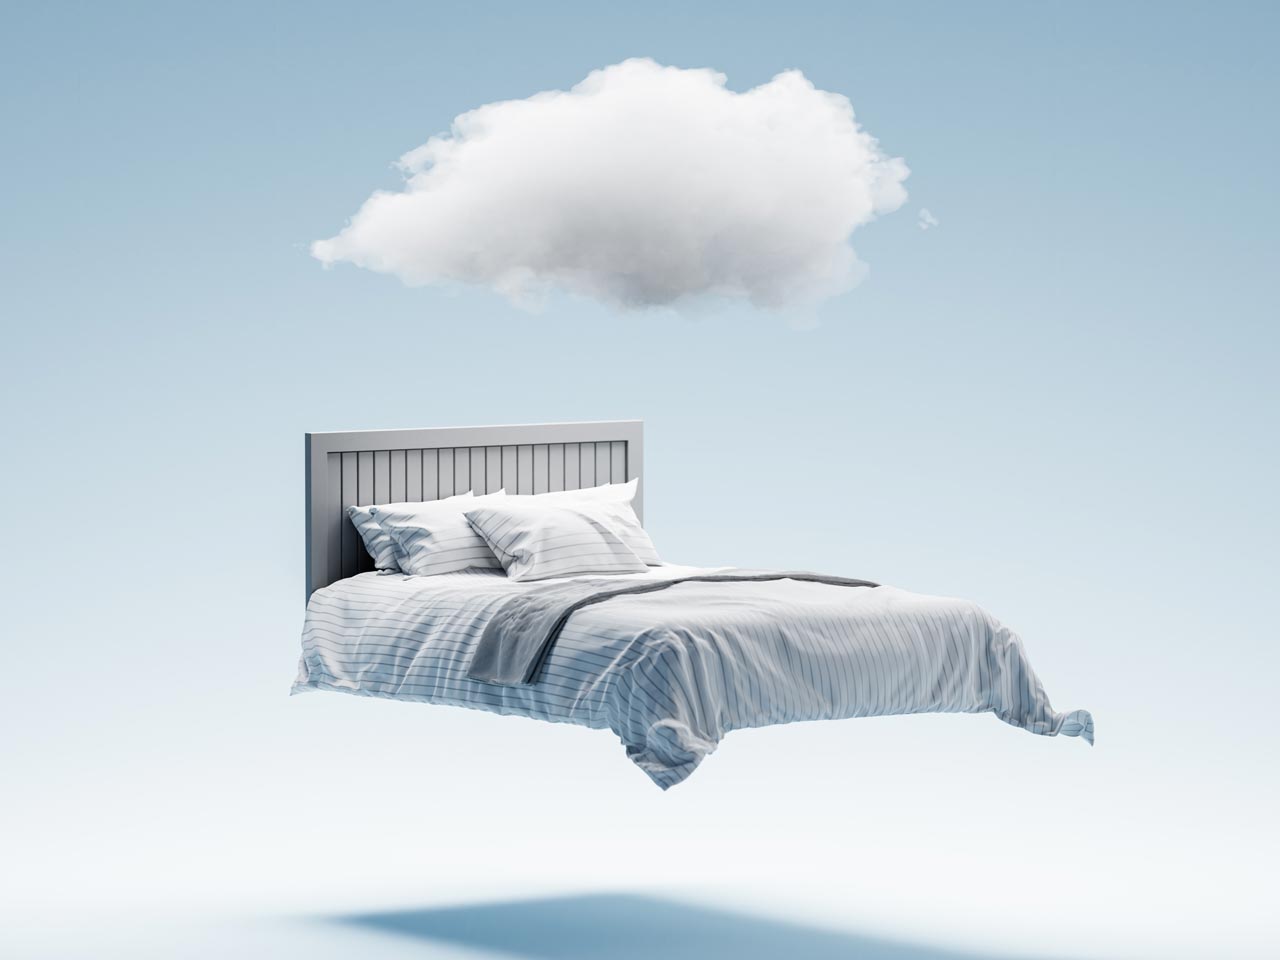 A bed floating in the sky with a cloud hovering above it, representing death wellness